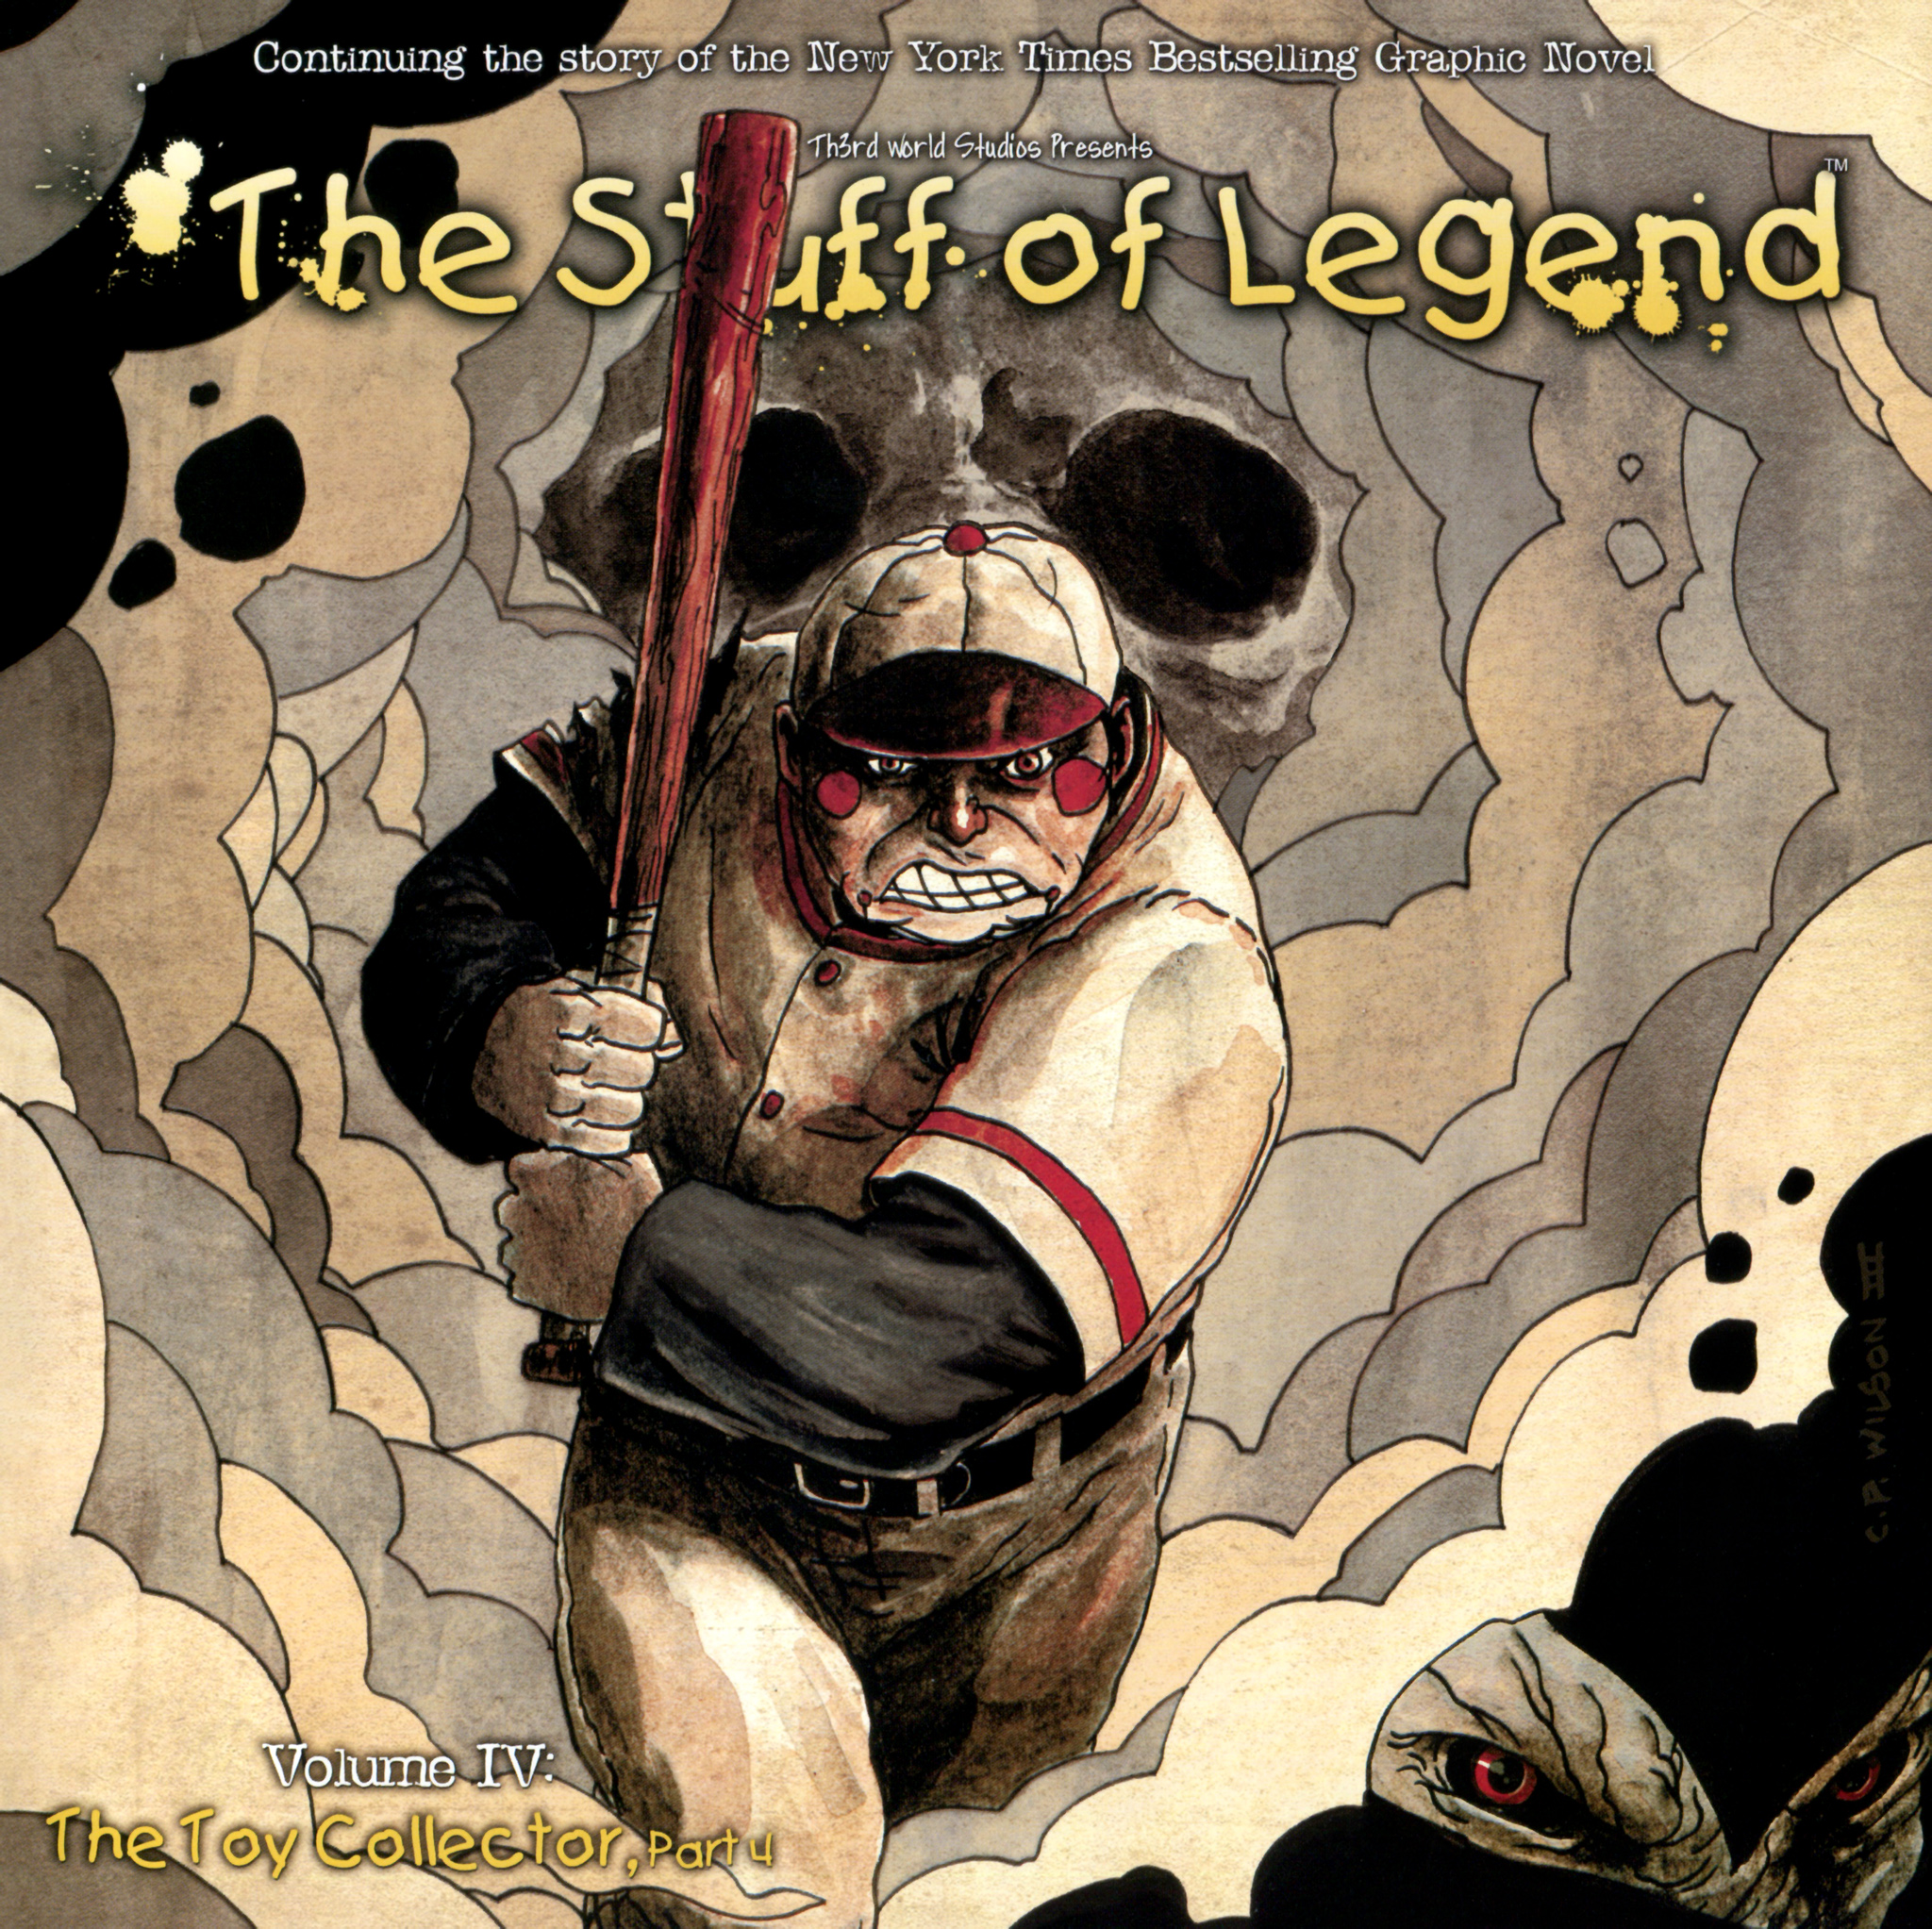 Read online The Stuff of Legend: Volume IV: The Toy Collector comic -  Issue #4 - 1